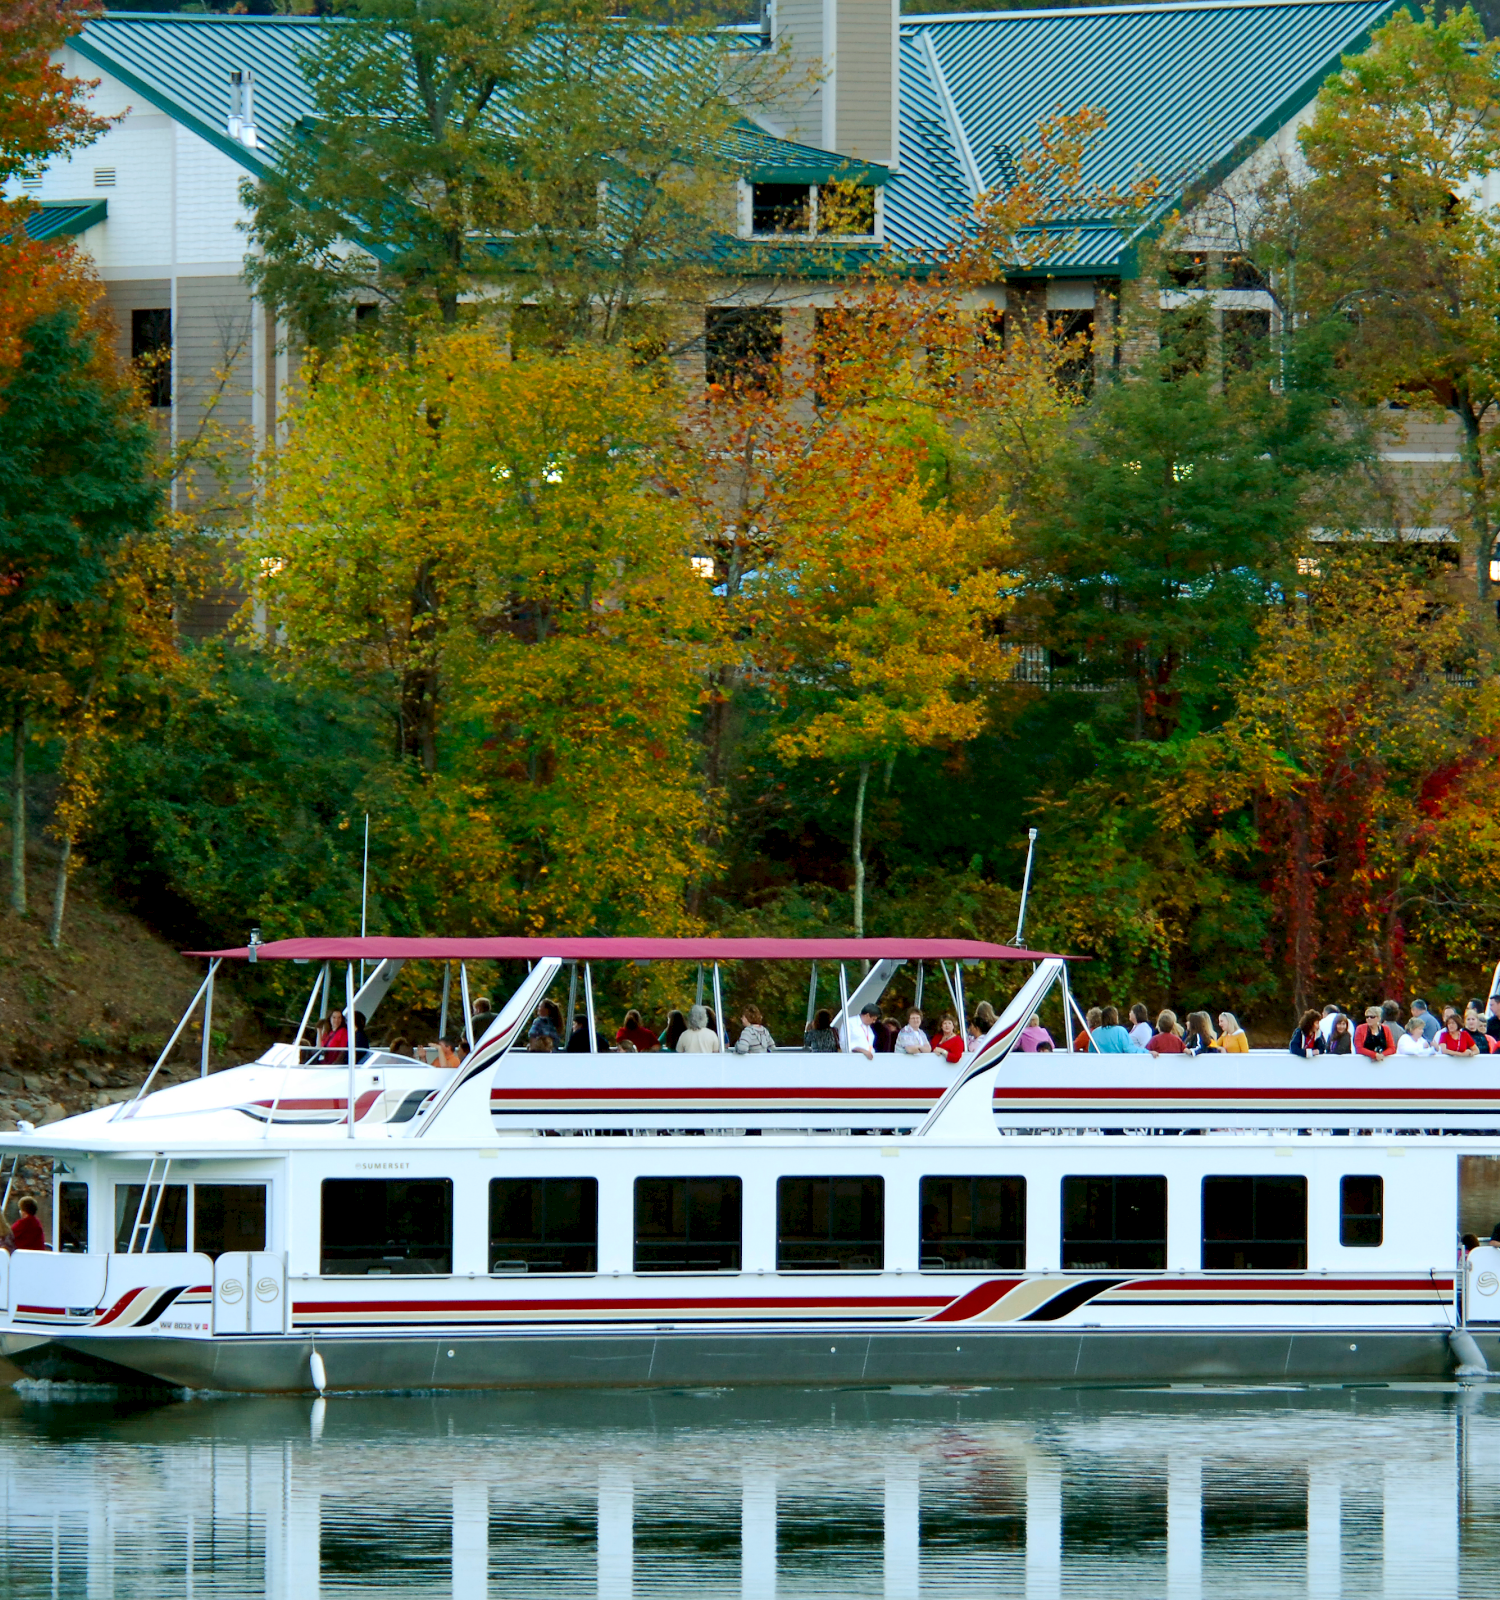 A white double-deck boat sails on a calm lake, surrounded by autumn trees and a building in the background.